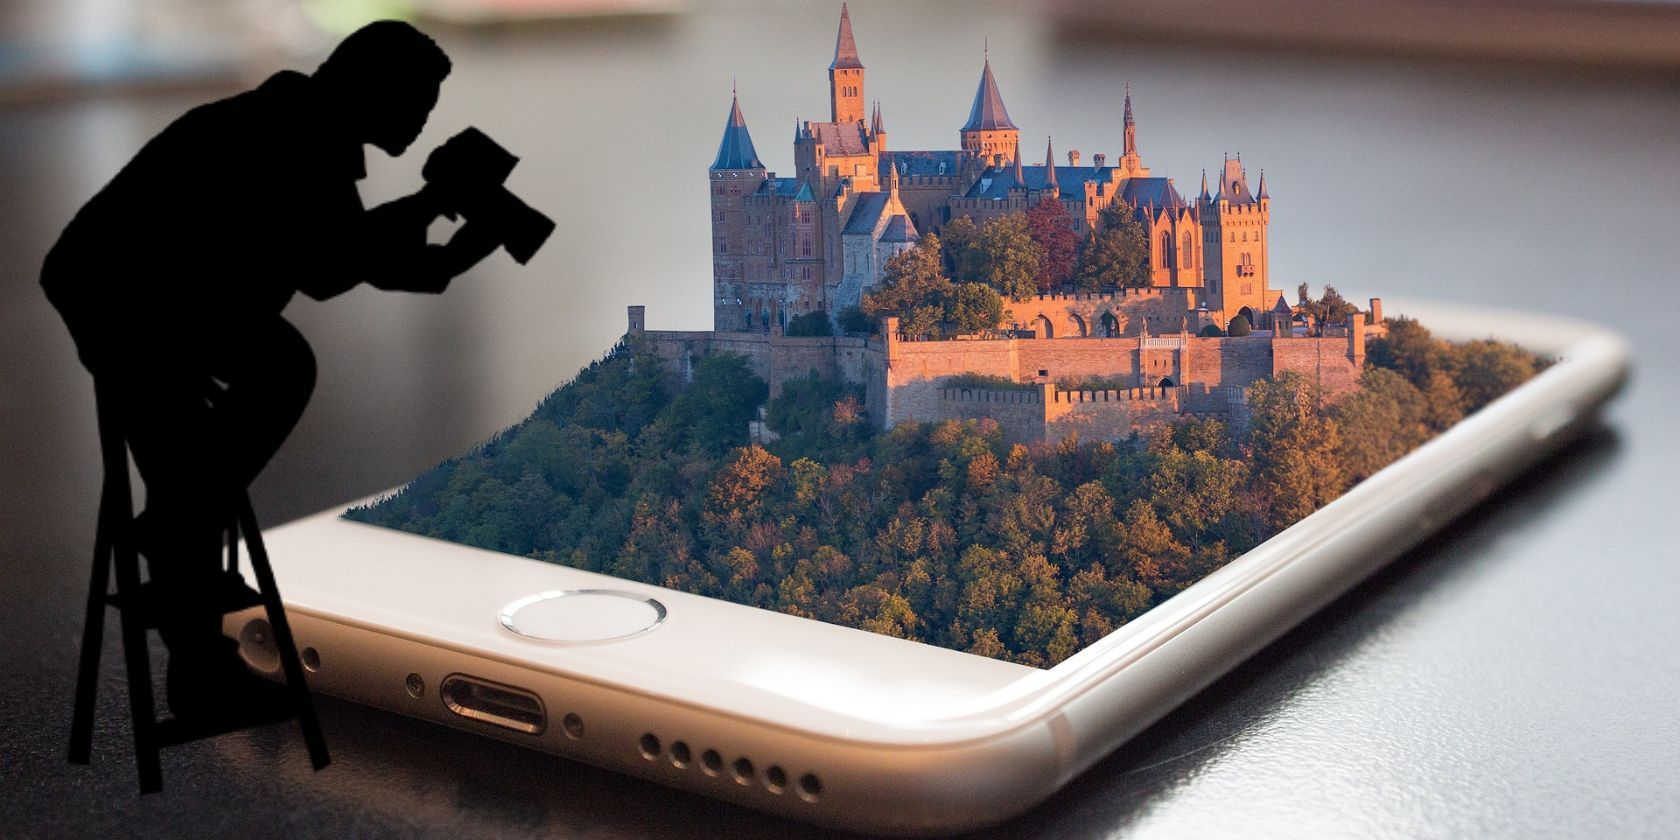 Smartphone with a 3d image of a castle seen on a desk with cameraman standing above